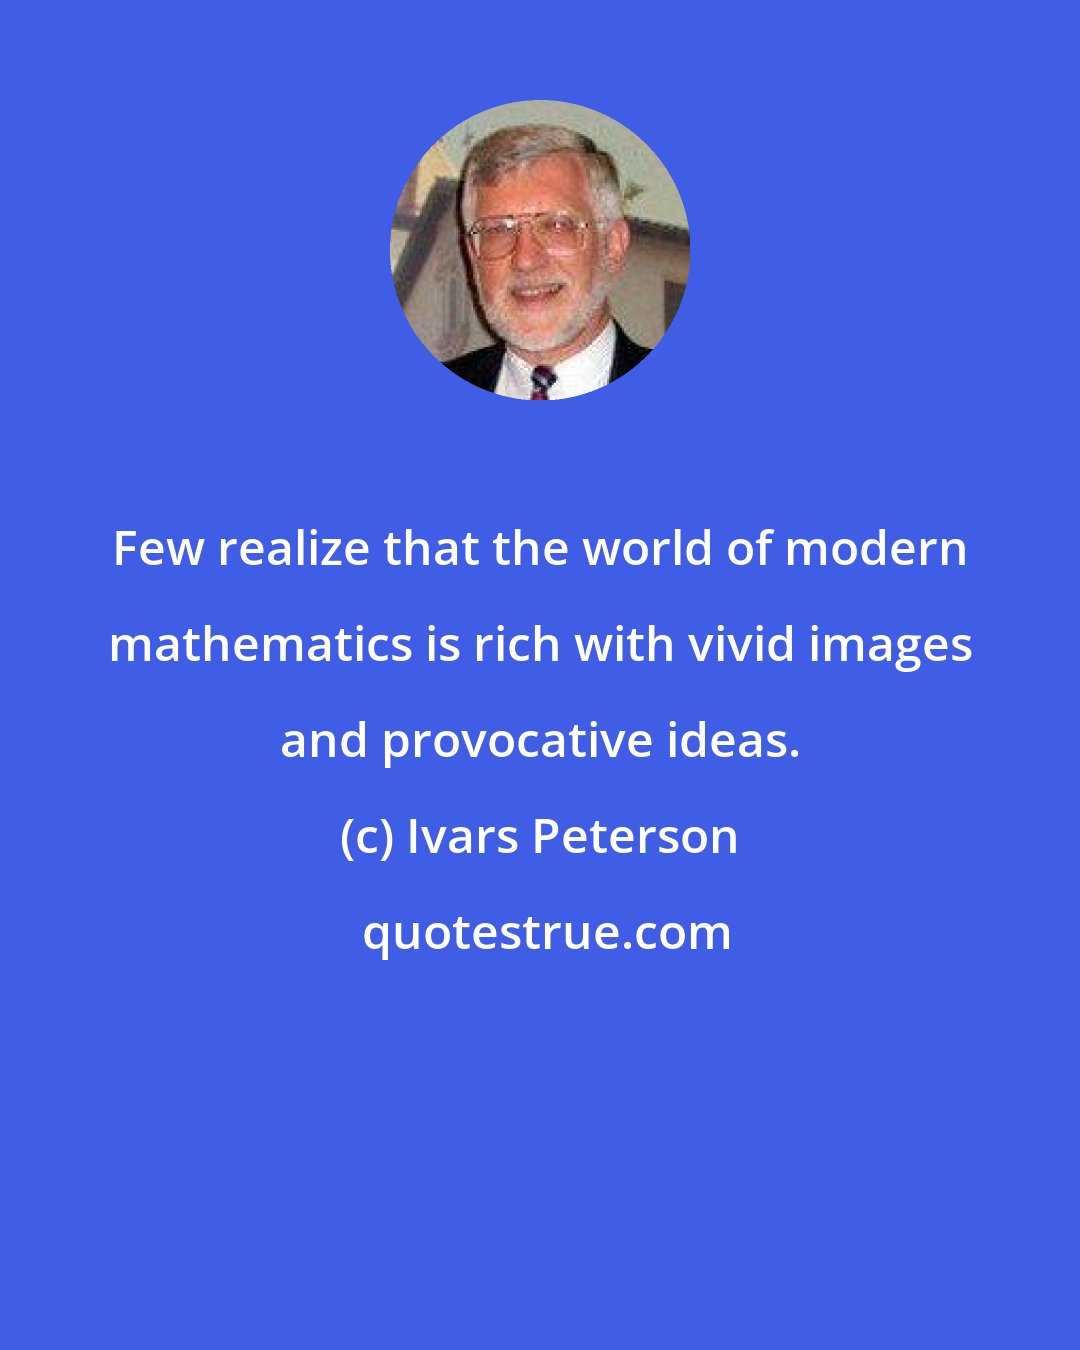 Ivars Peterson: Few realize that the world of modern mathematics is rich with vivid images and provocative ideas.